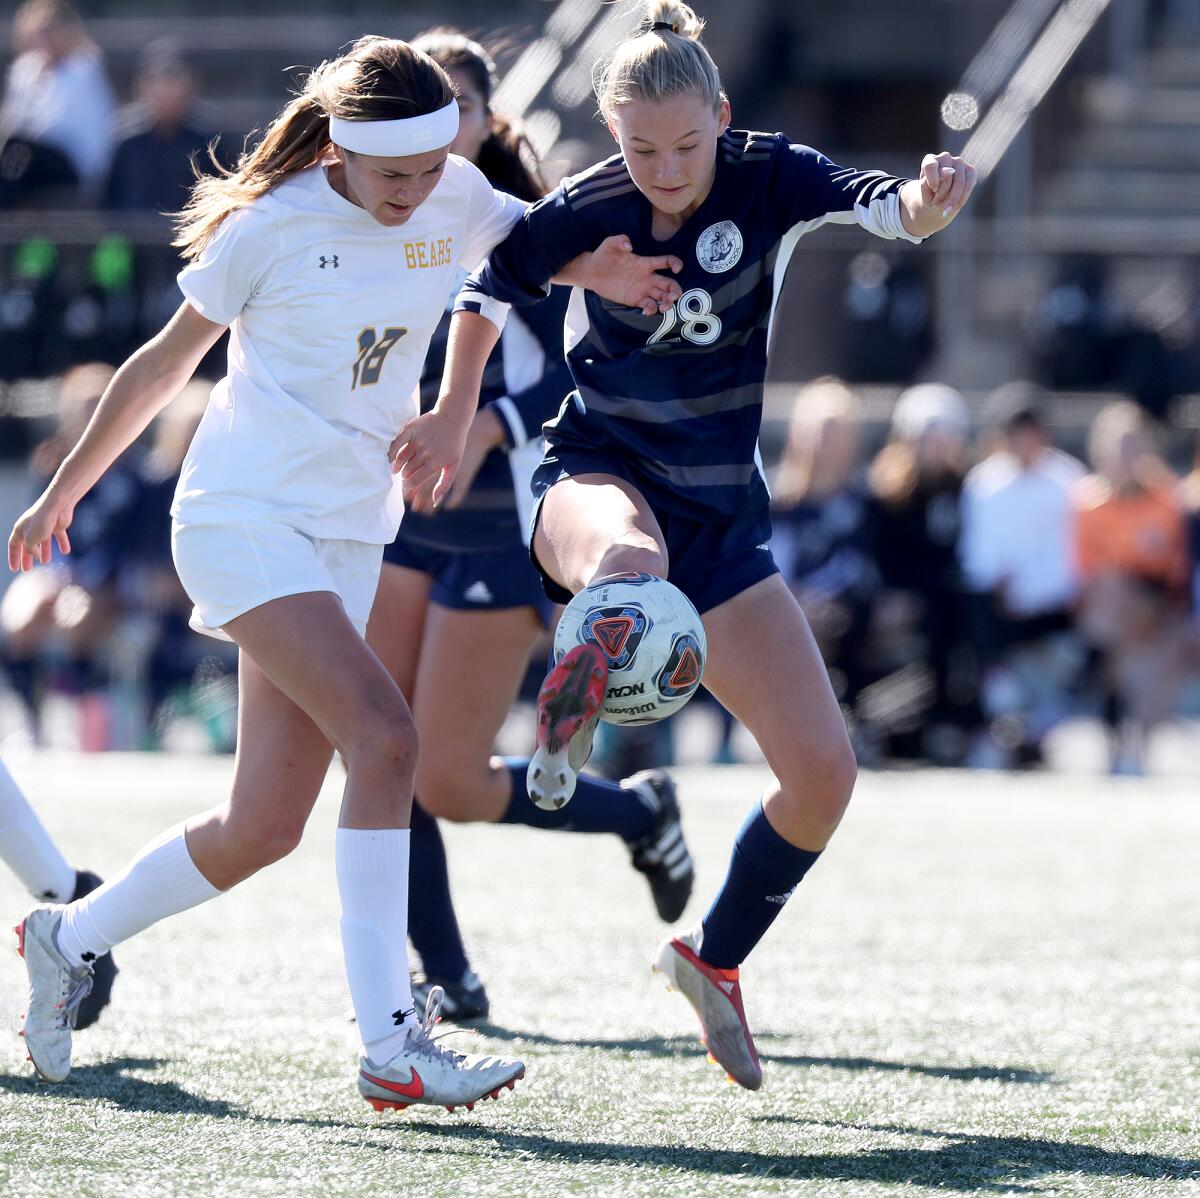 Newport Harbor's Alex Thomas, right, battles Temecula Valley's Kate Jacobsen for a loose ball.